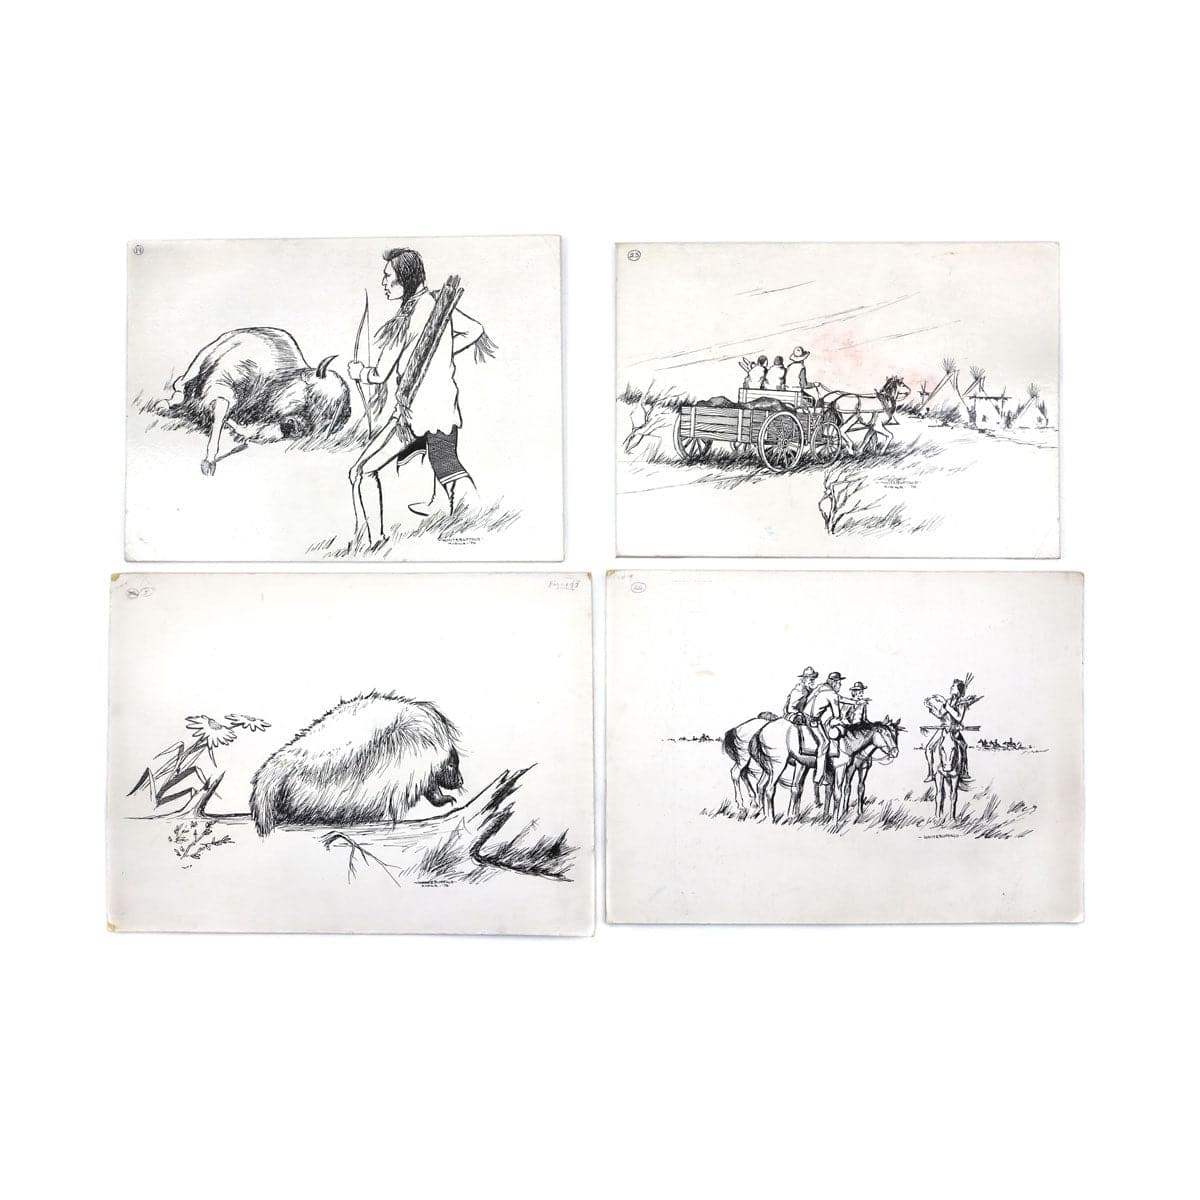 Group of 56 Original Kiowa Drawings, 120 Anko Calendar Drawings, and 13 Vinyl Records of Songs Arranged and Sung by Various Singers of the Southern and Northern Plains Tribes (M90218C-0621-001)3